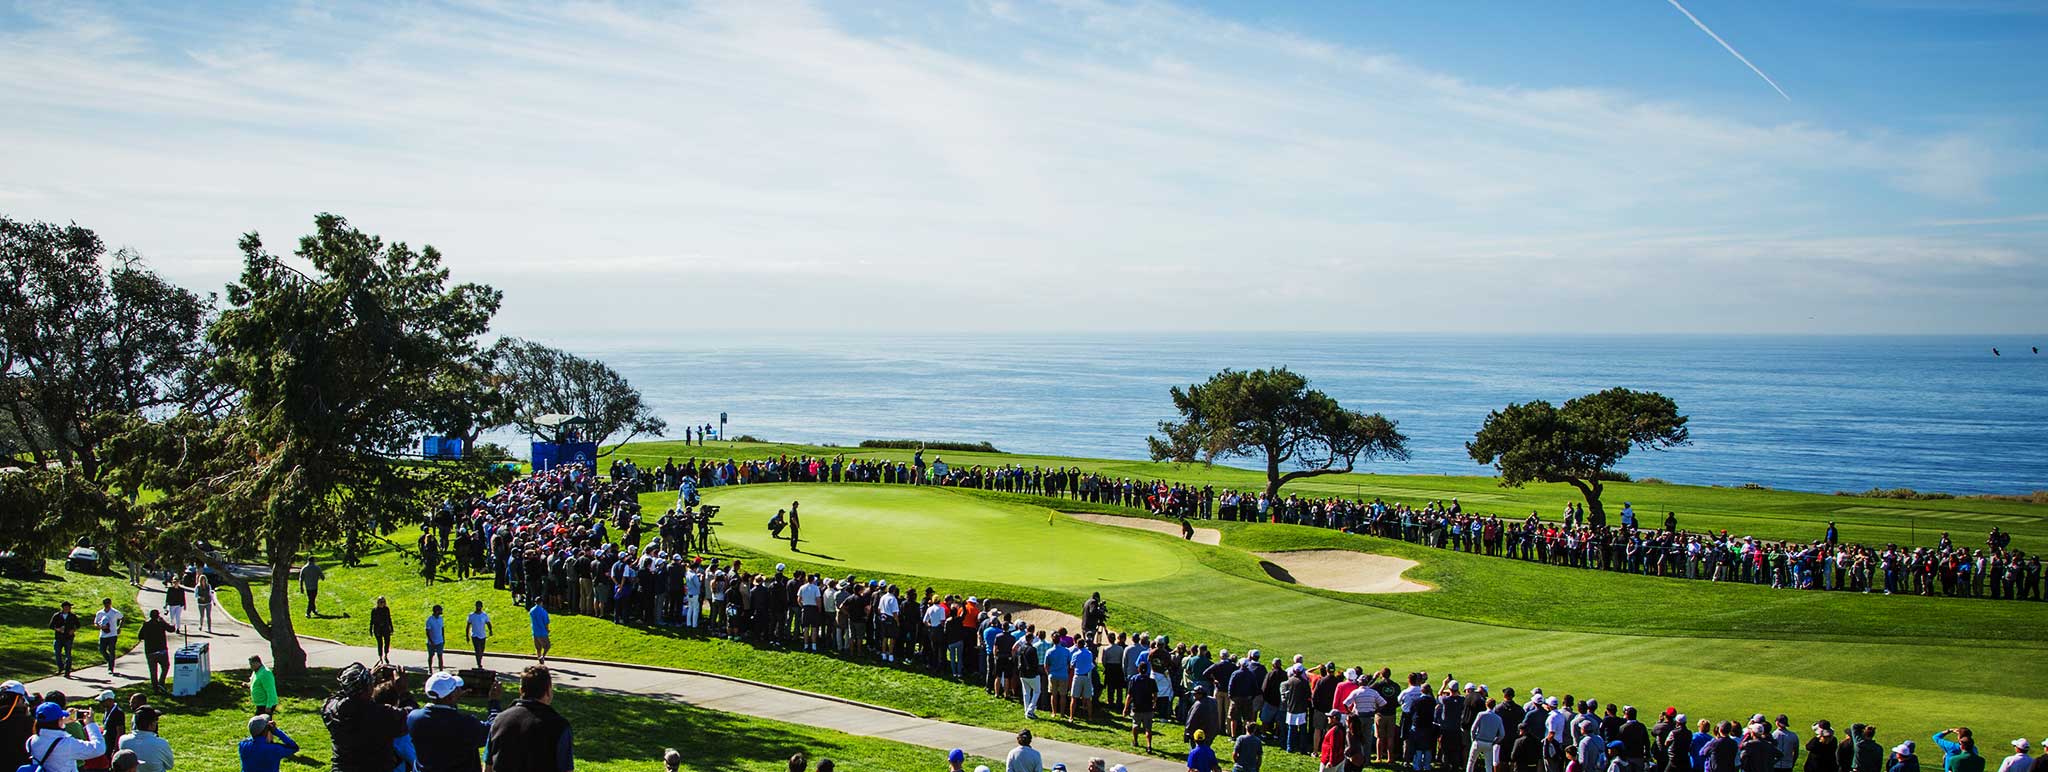 Save the Date: Farmers Insurance Open to be held in San Diego Jan. 24-27, 2019